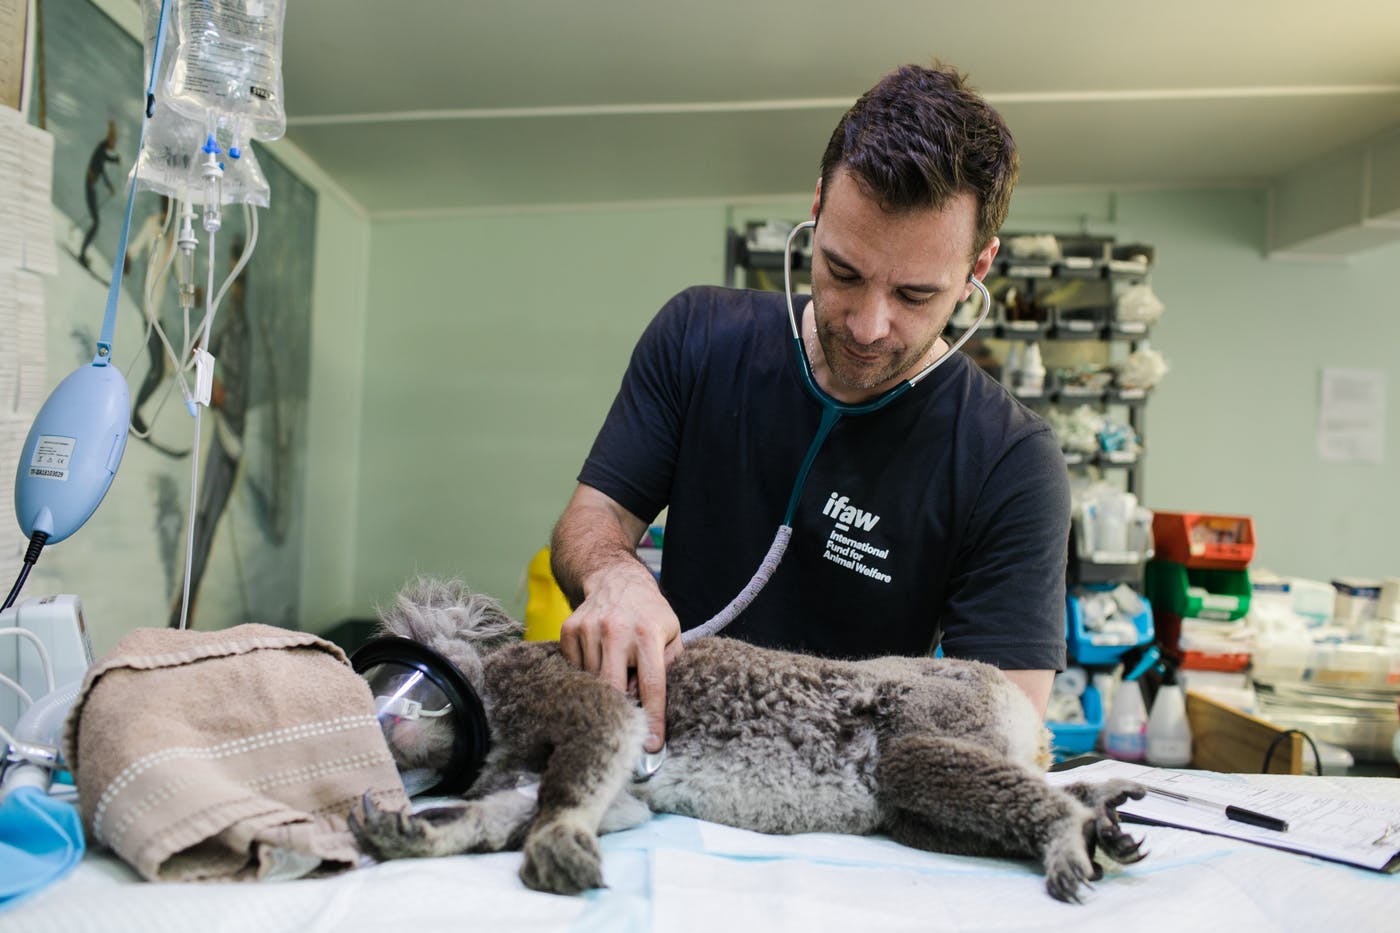 From dolphins being released back into the water to a veterinarian treating a sick koala, these authentic images show what it's like to work with the animals who need IFAW’s help, in a range of locations across the globe.